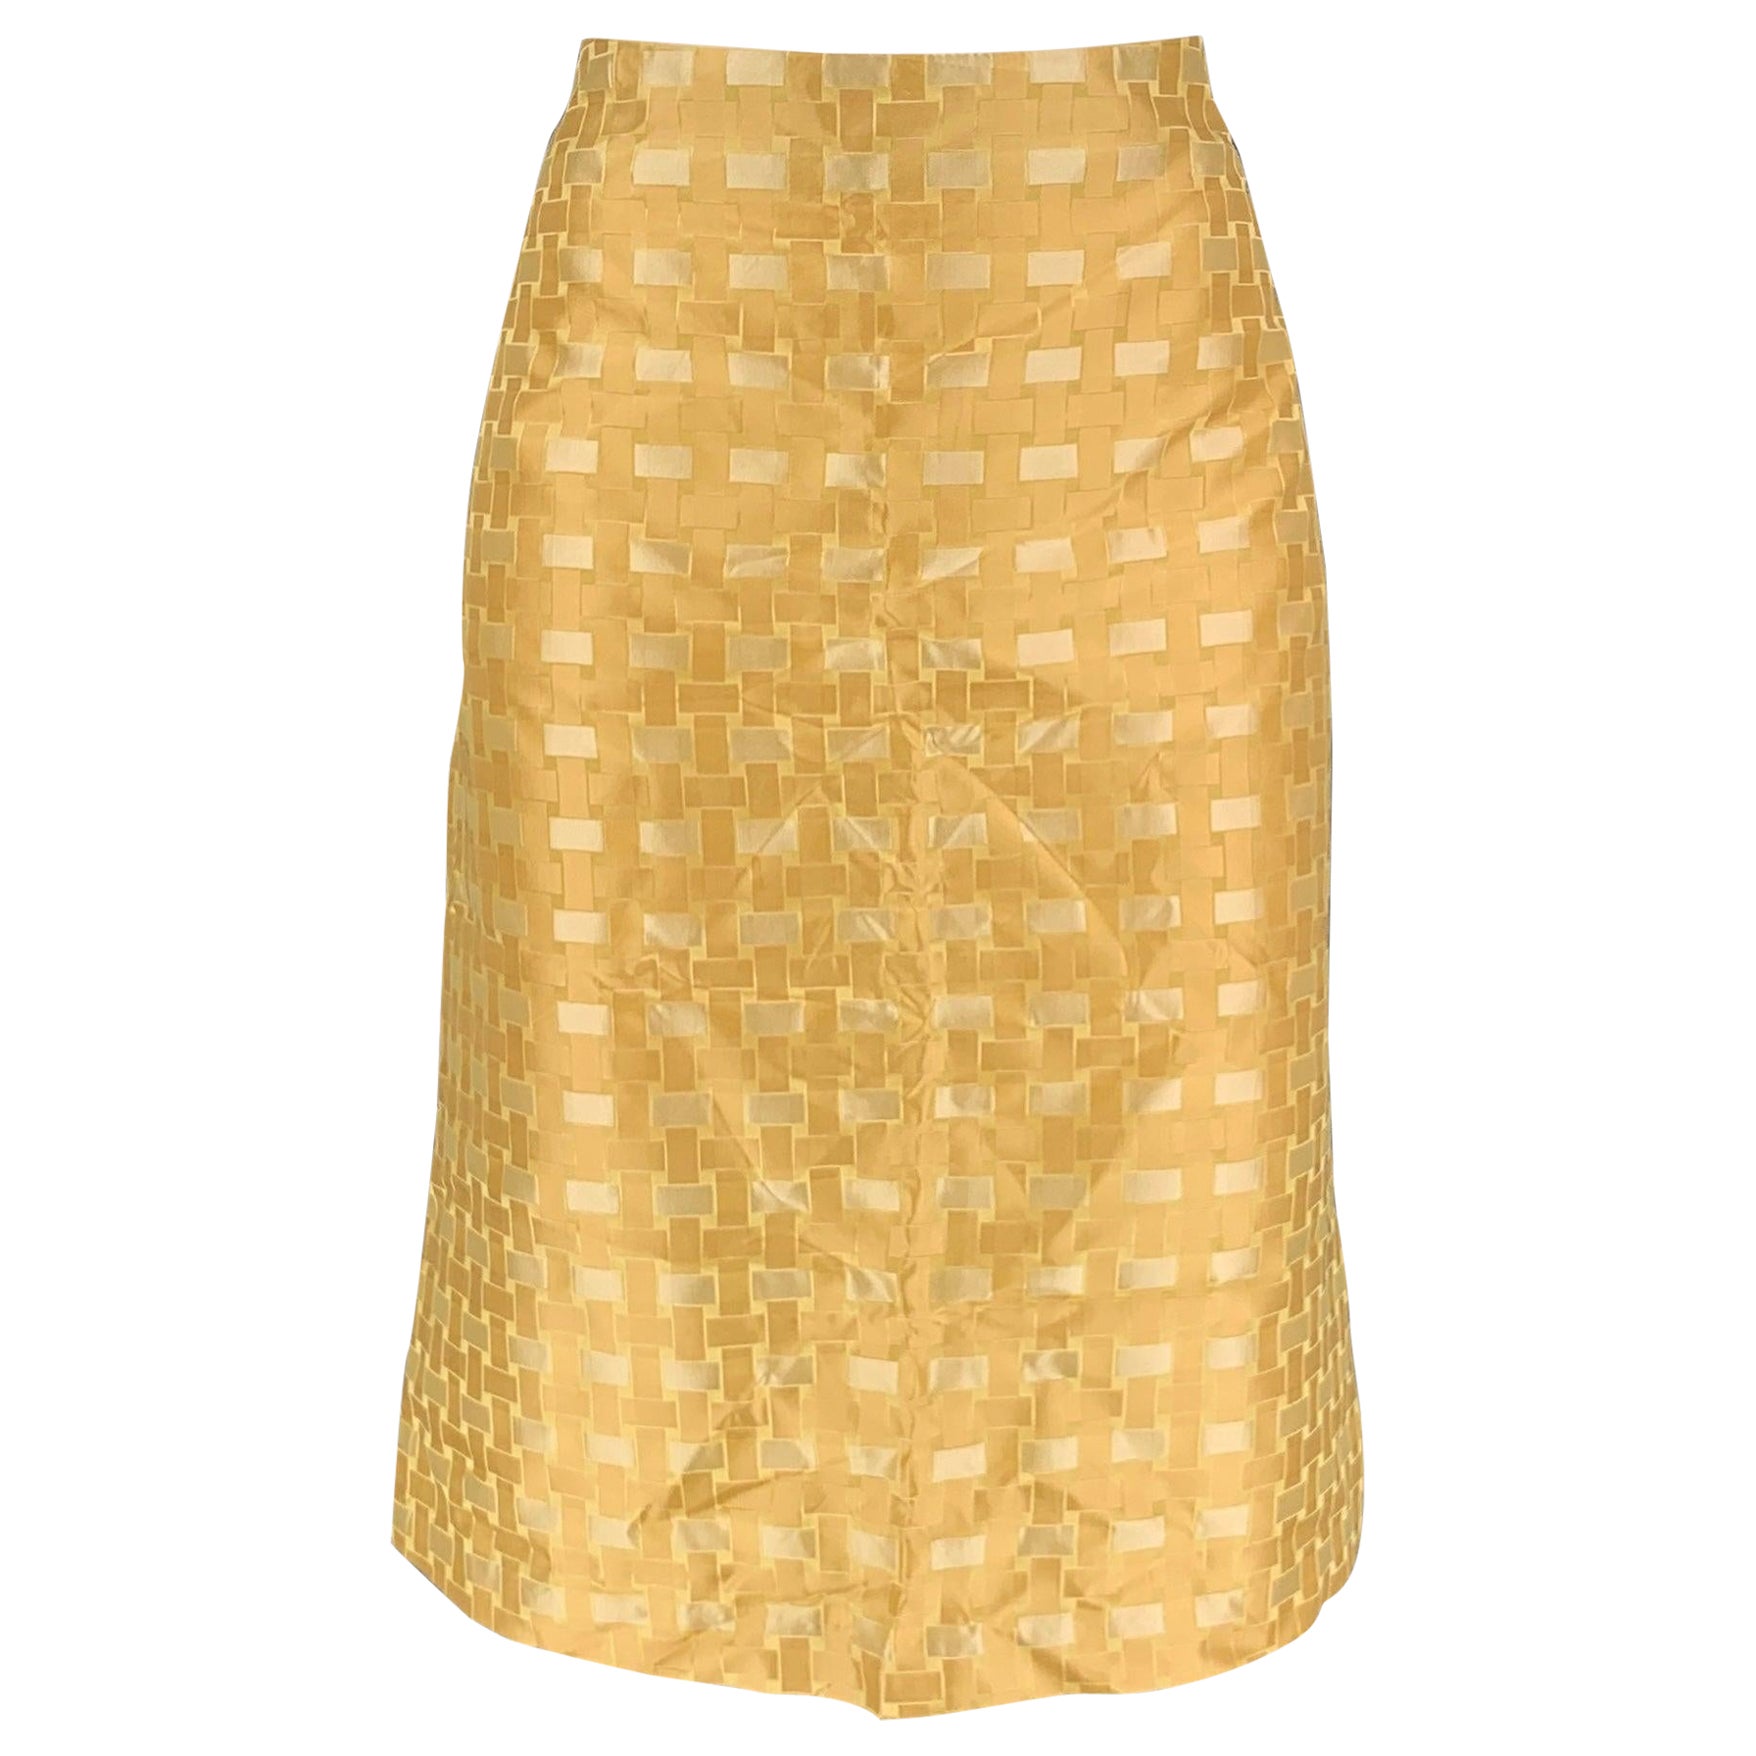 BURBERRY PRORSUM Spring 2006 Size 8 Gold Geomtric Silk Knee-Length Skirt For Sale